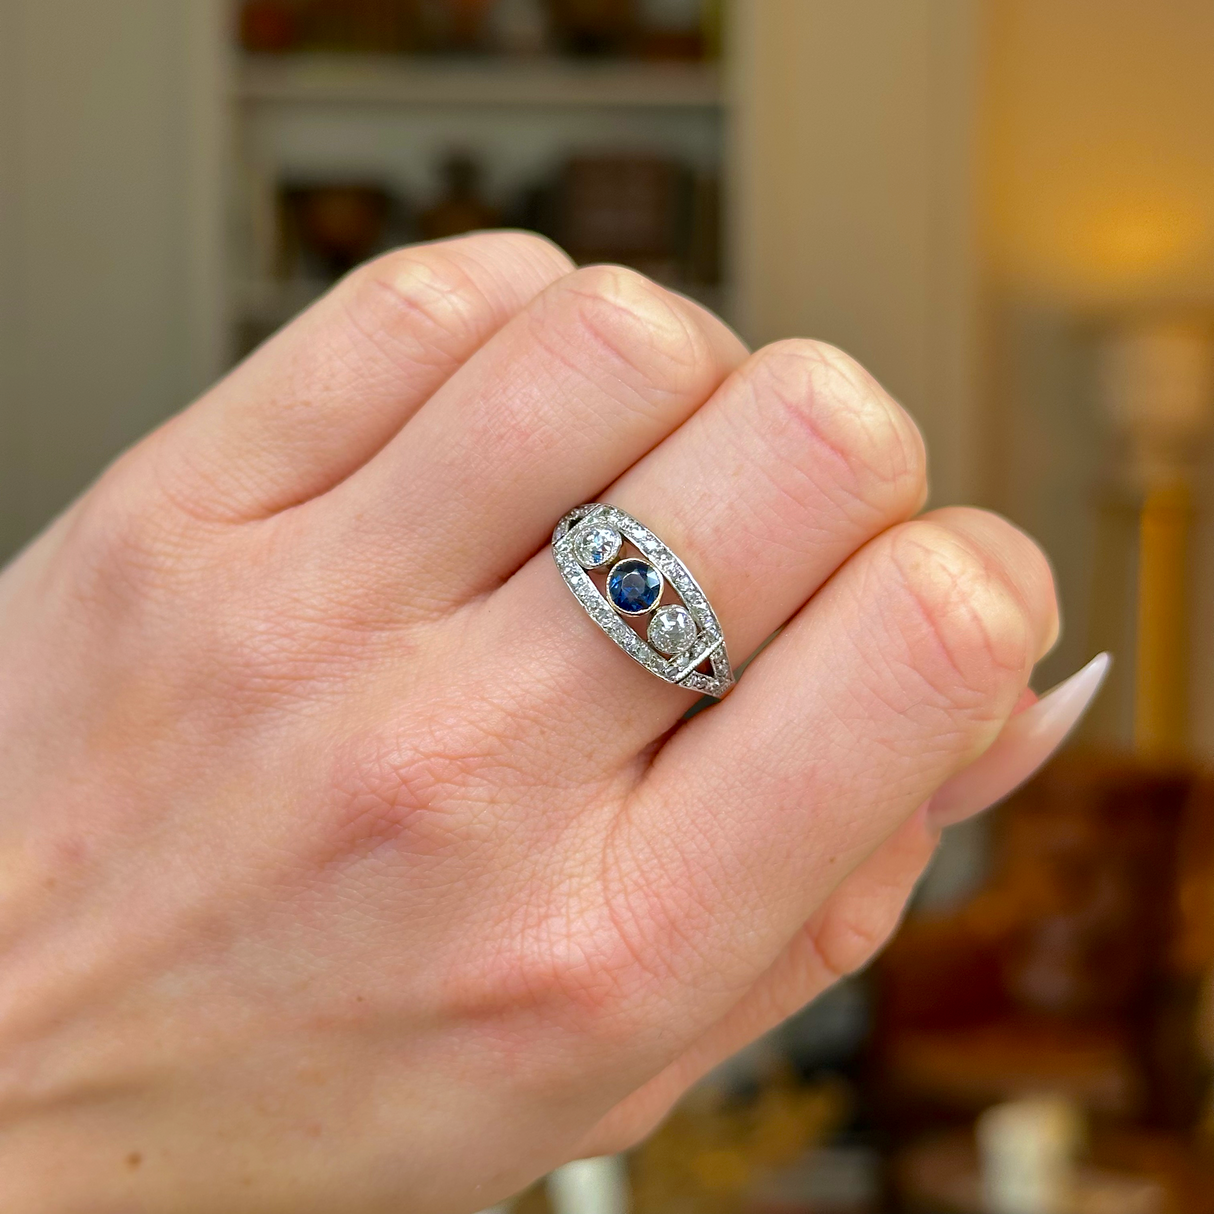 Antique, Belle Époque Sapphire and Diamond Three Stone Ring, 18ct Yellow Gold and Platinum worn on hand.